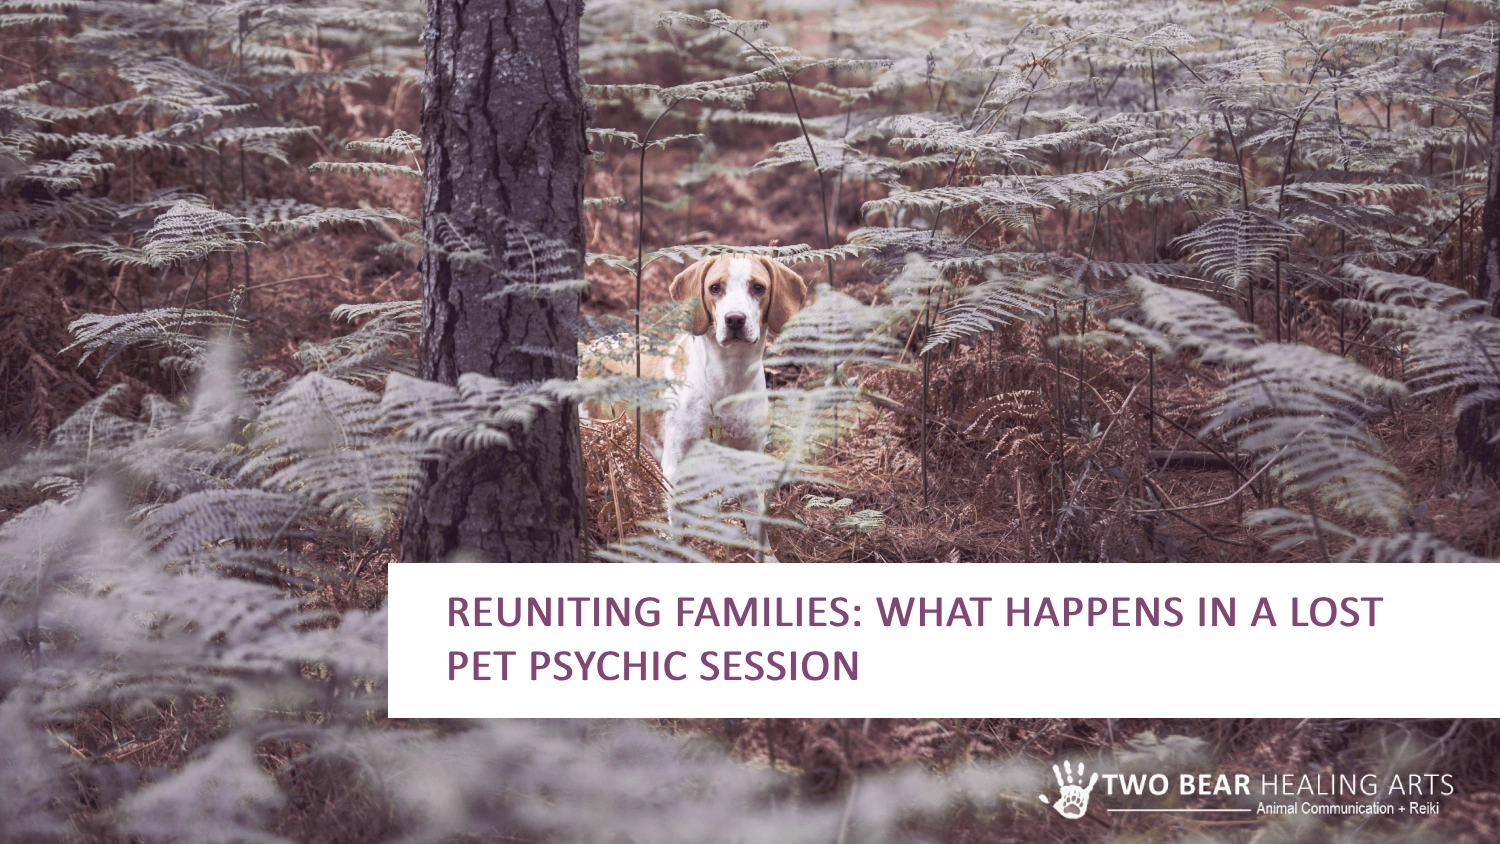 Hope for lost pets! Image of a lost dog searching the woods, with a question mark glowing above. Explore the possibility of a pet psychic session to potentially gain clues and comfort during your search for your missing furry friend.